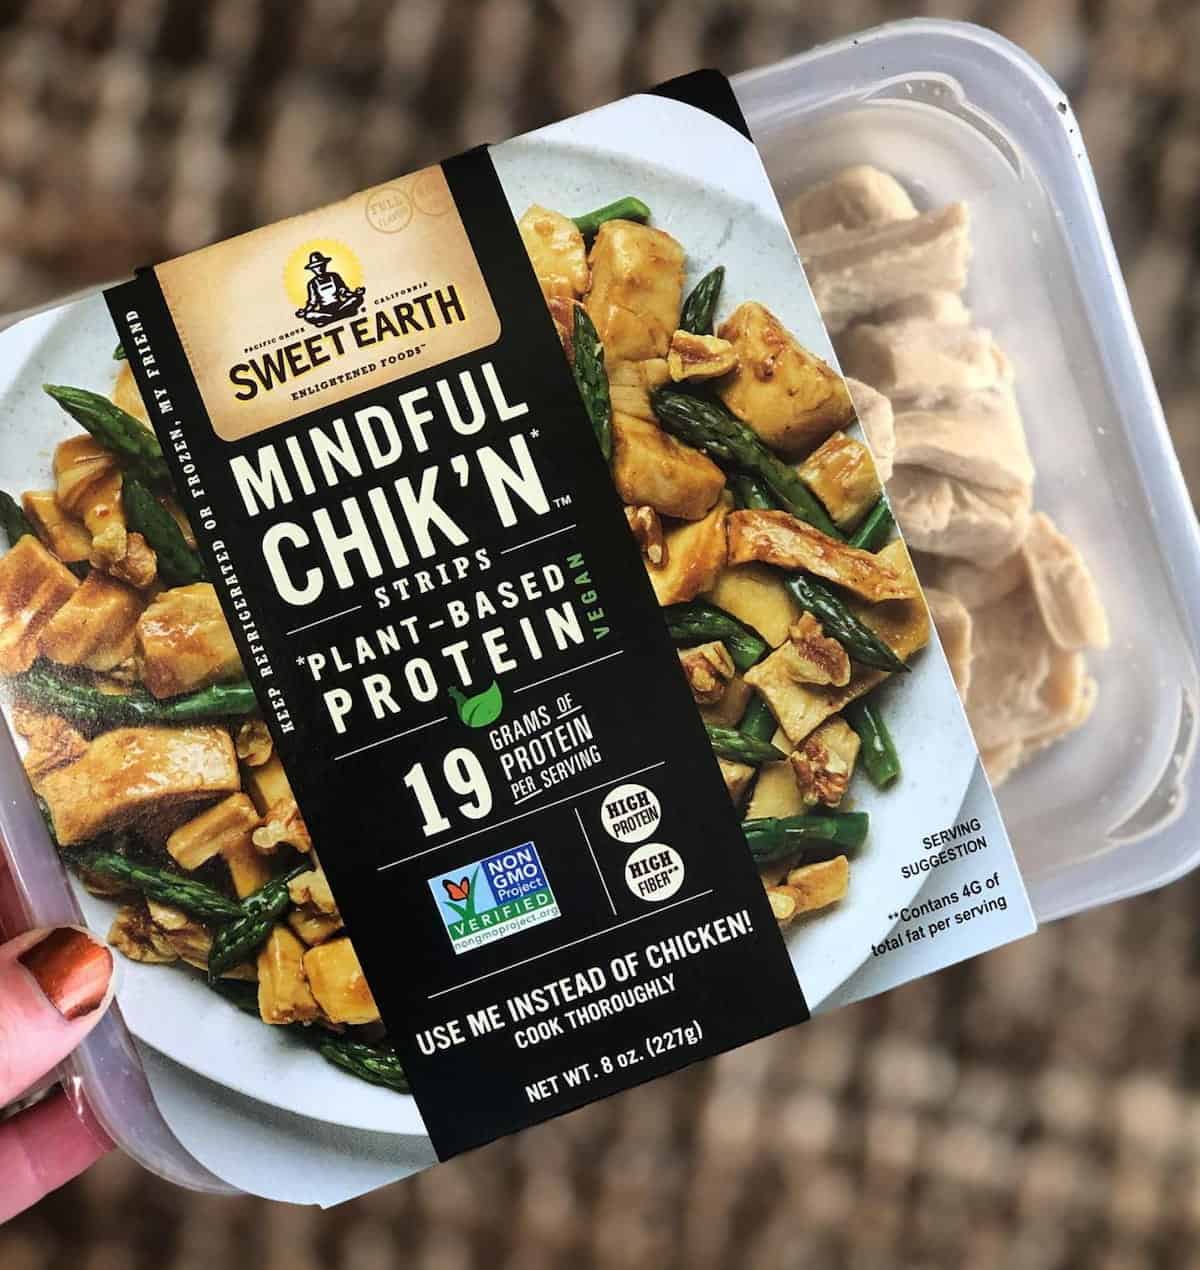 A package of Sweet Earth brand Mindful Chick'n.